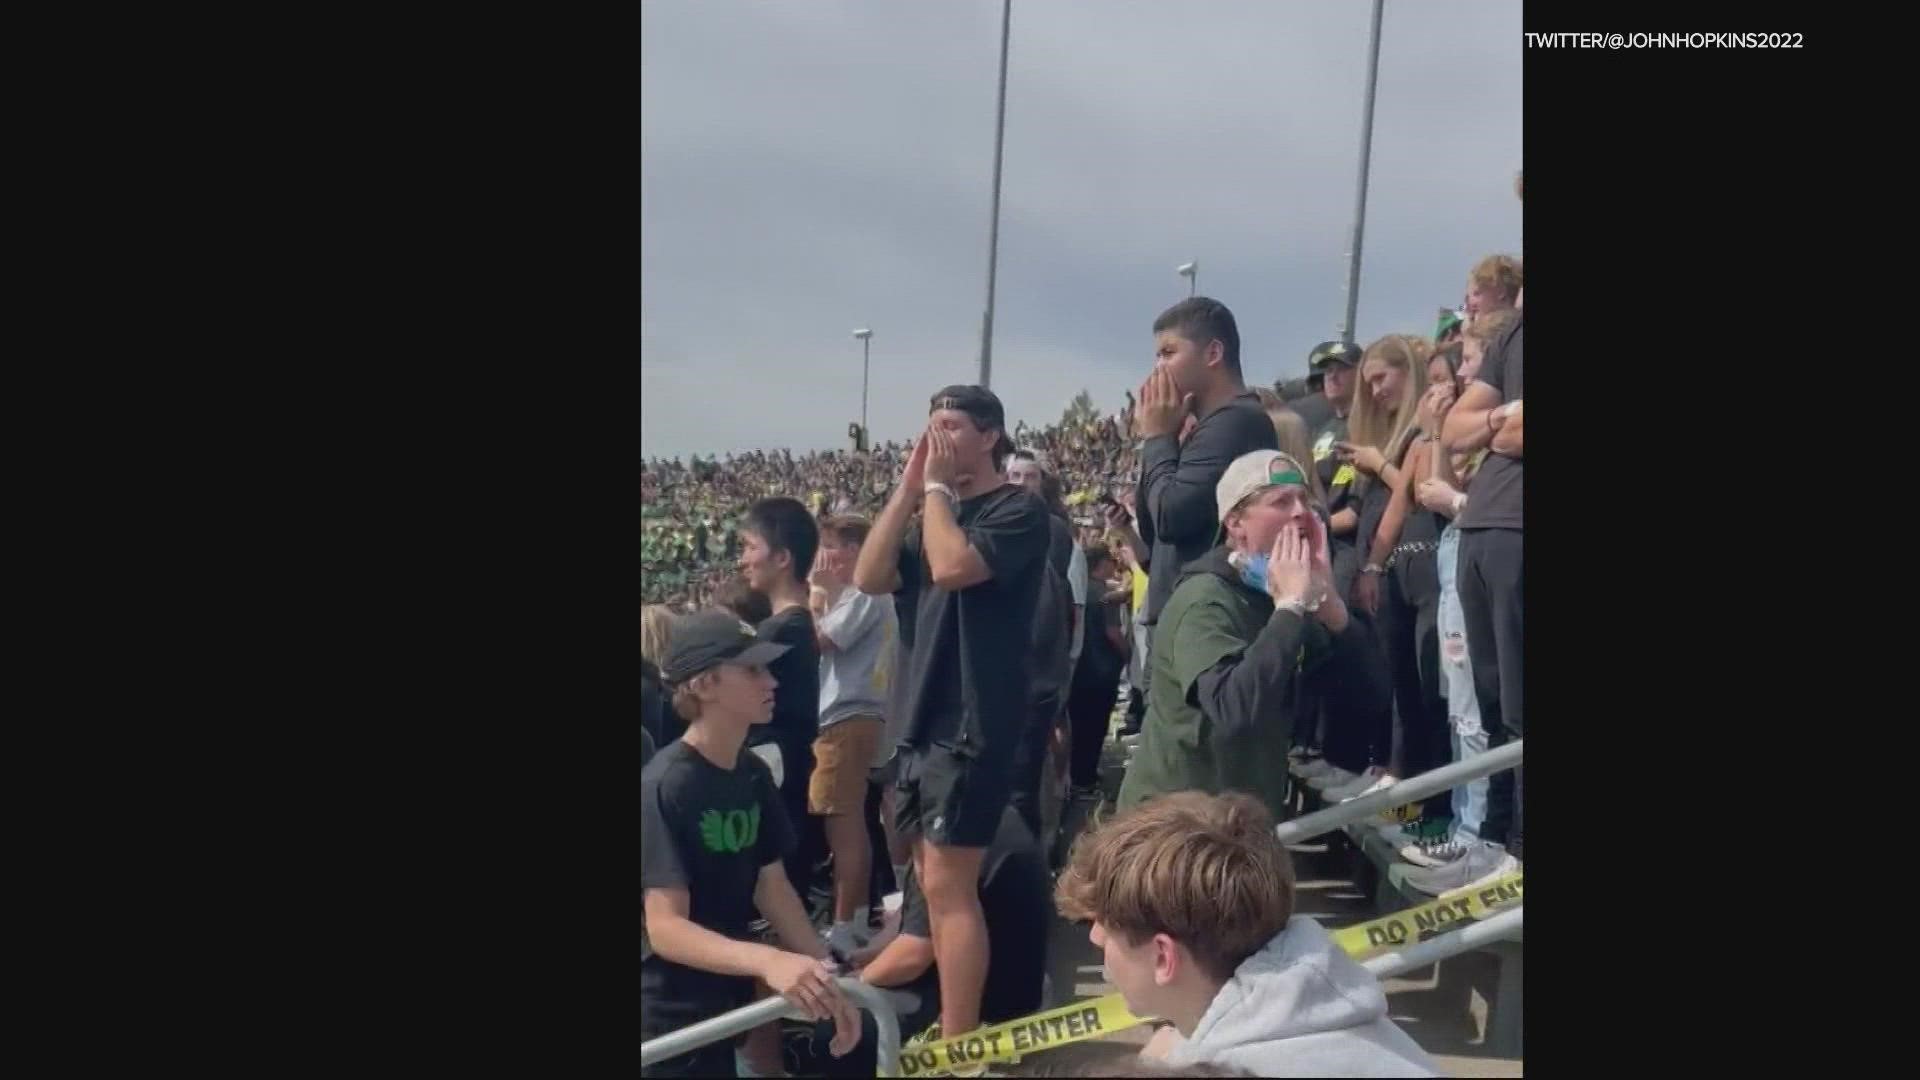 Video shared on social media showed people in the Ducks student section chanting “f*** the Mormons,” prompting a high-profile backlash.